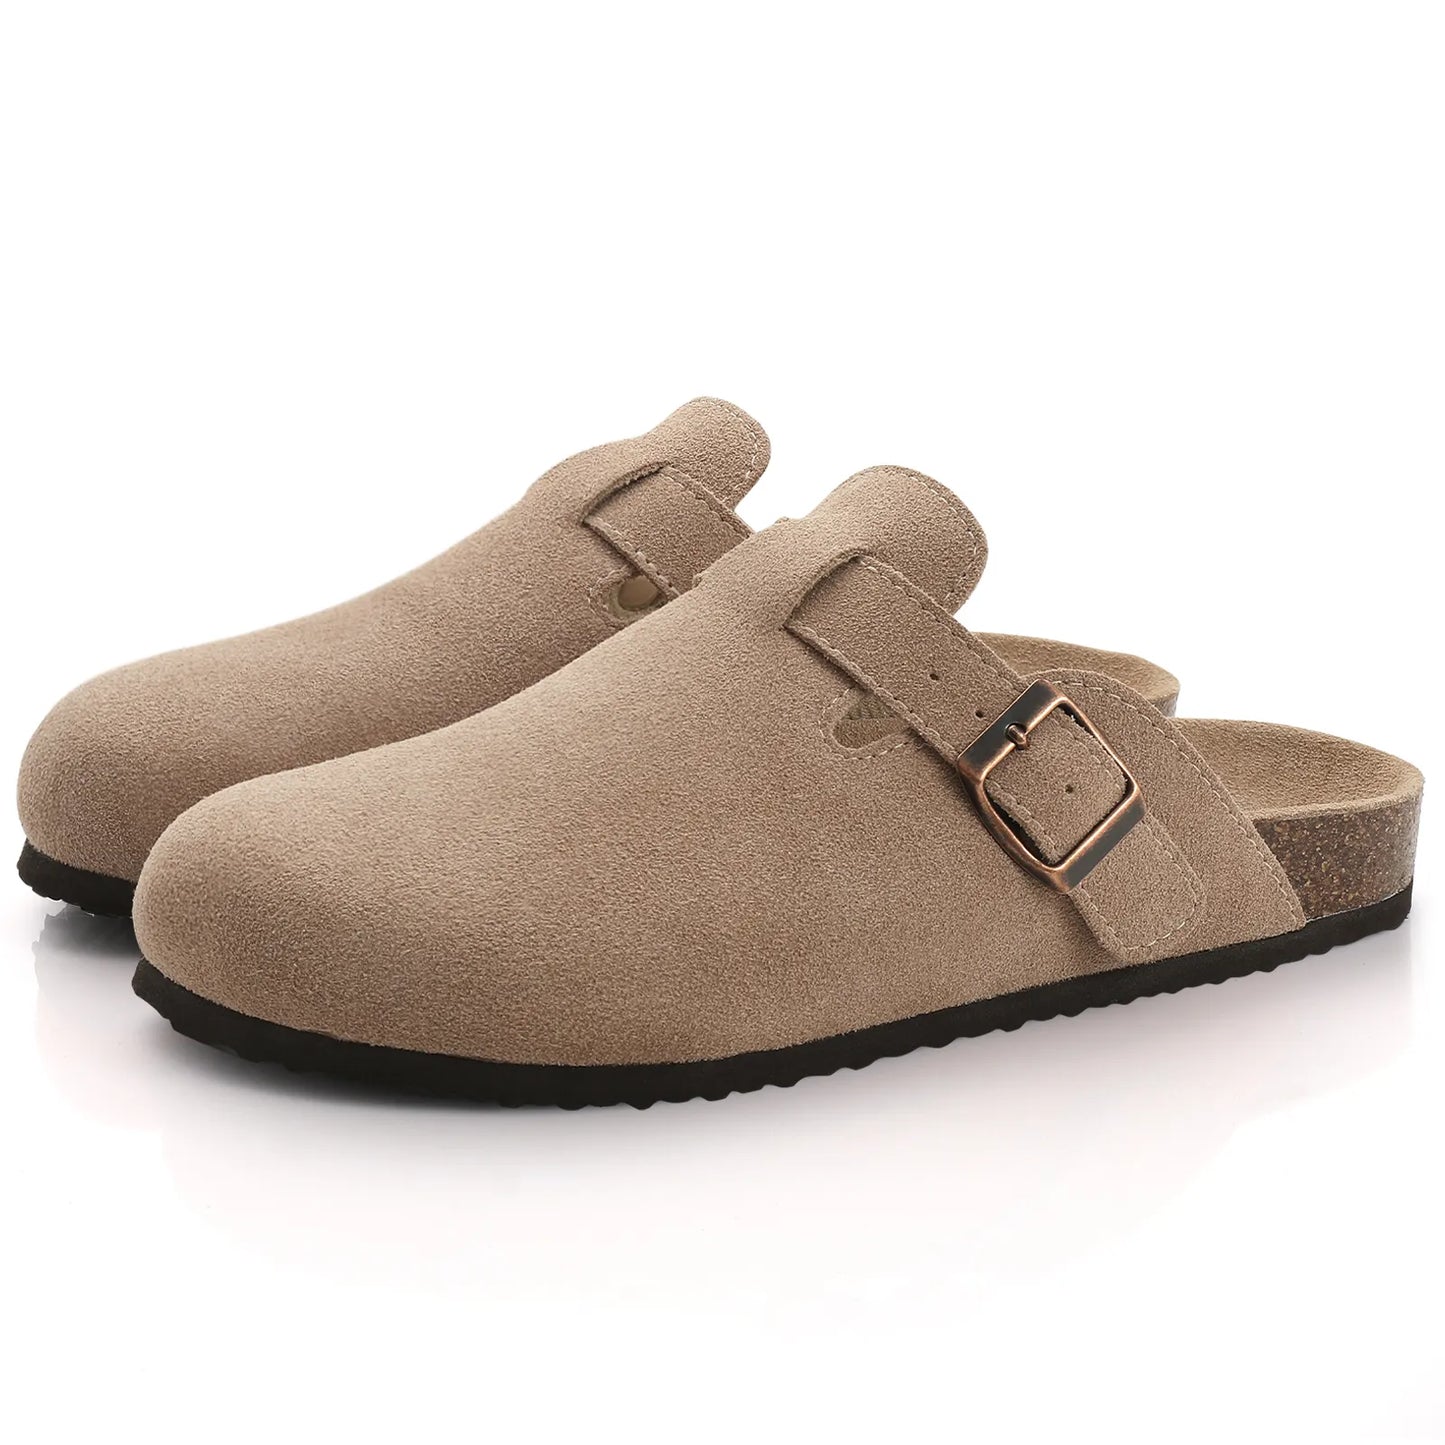 Shearling Mules With Cork Soles Stylish Summer Sandals For Women And Men  From So_goods, $23.74